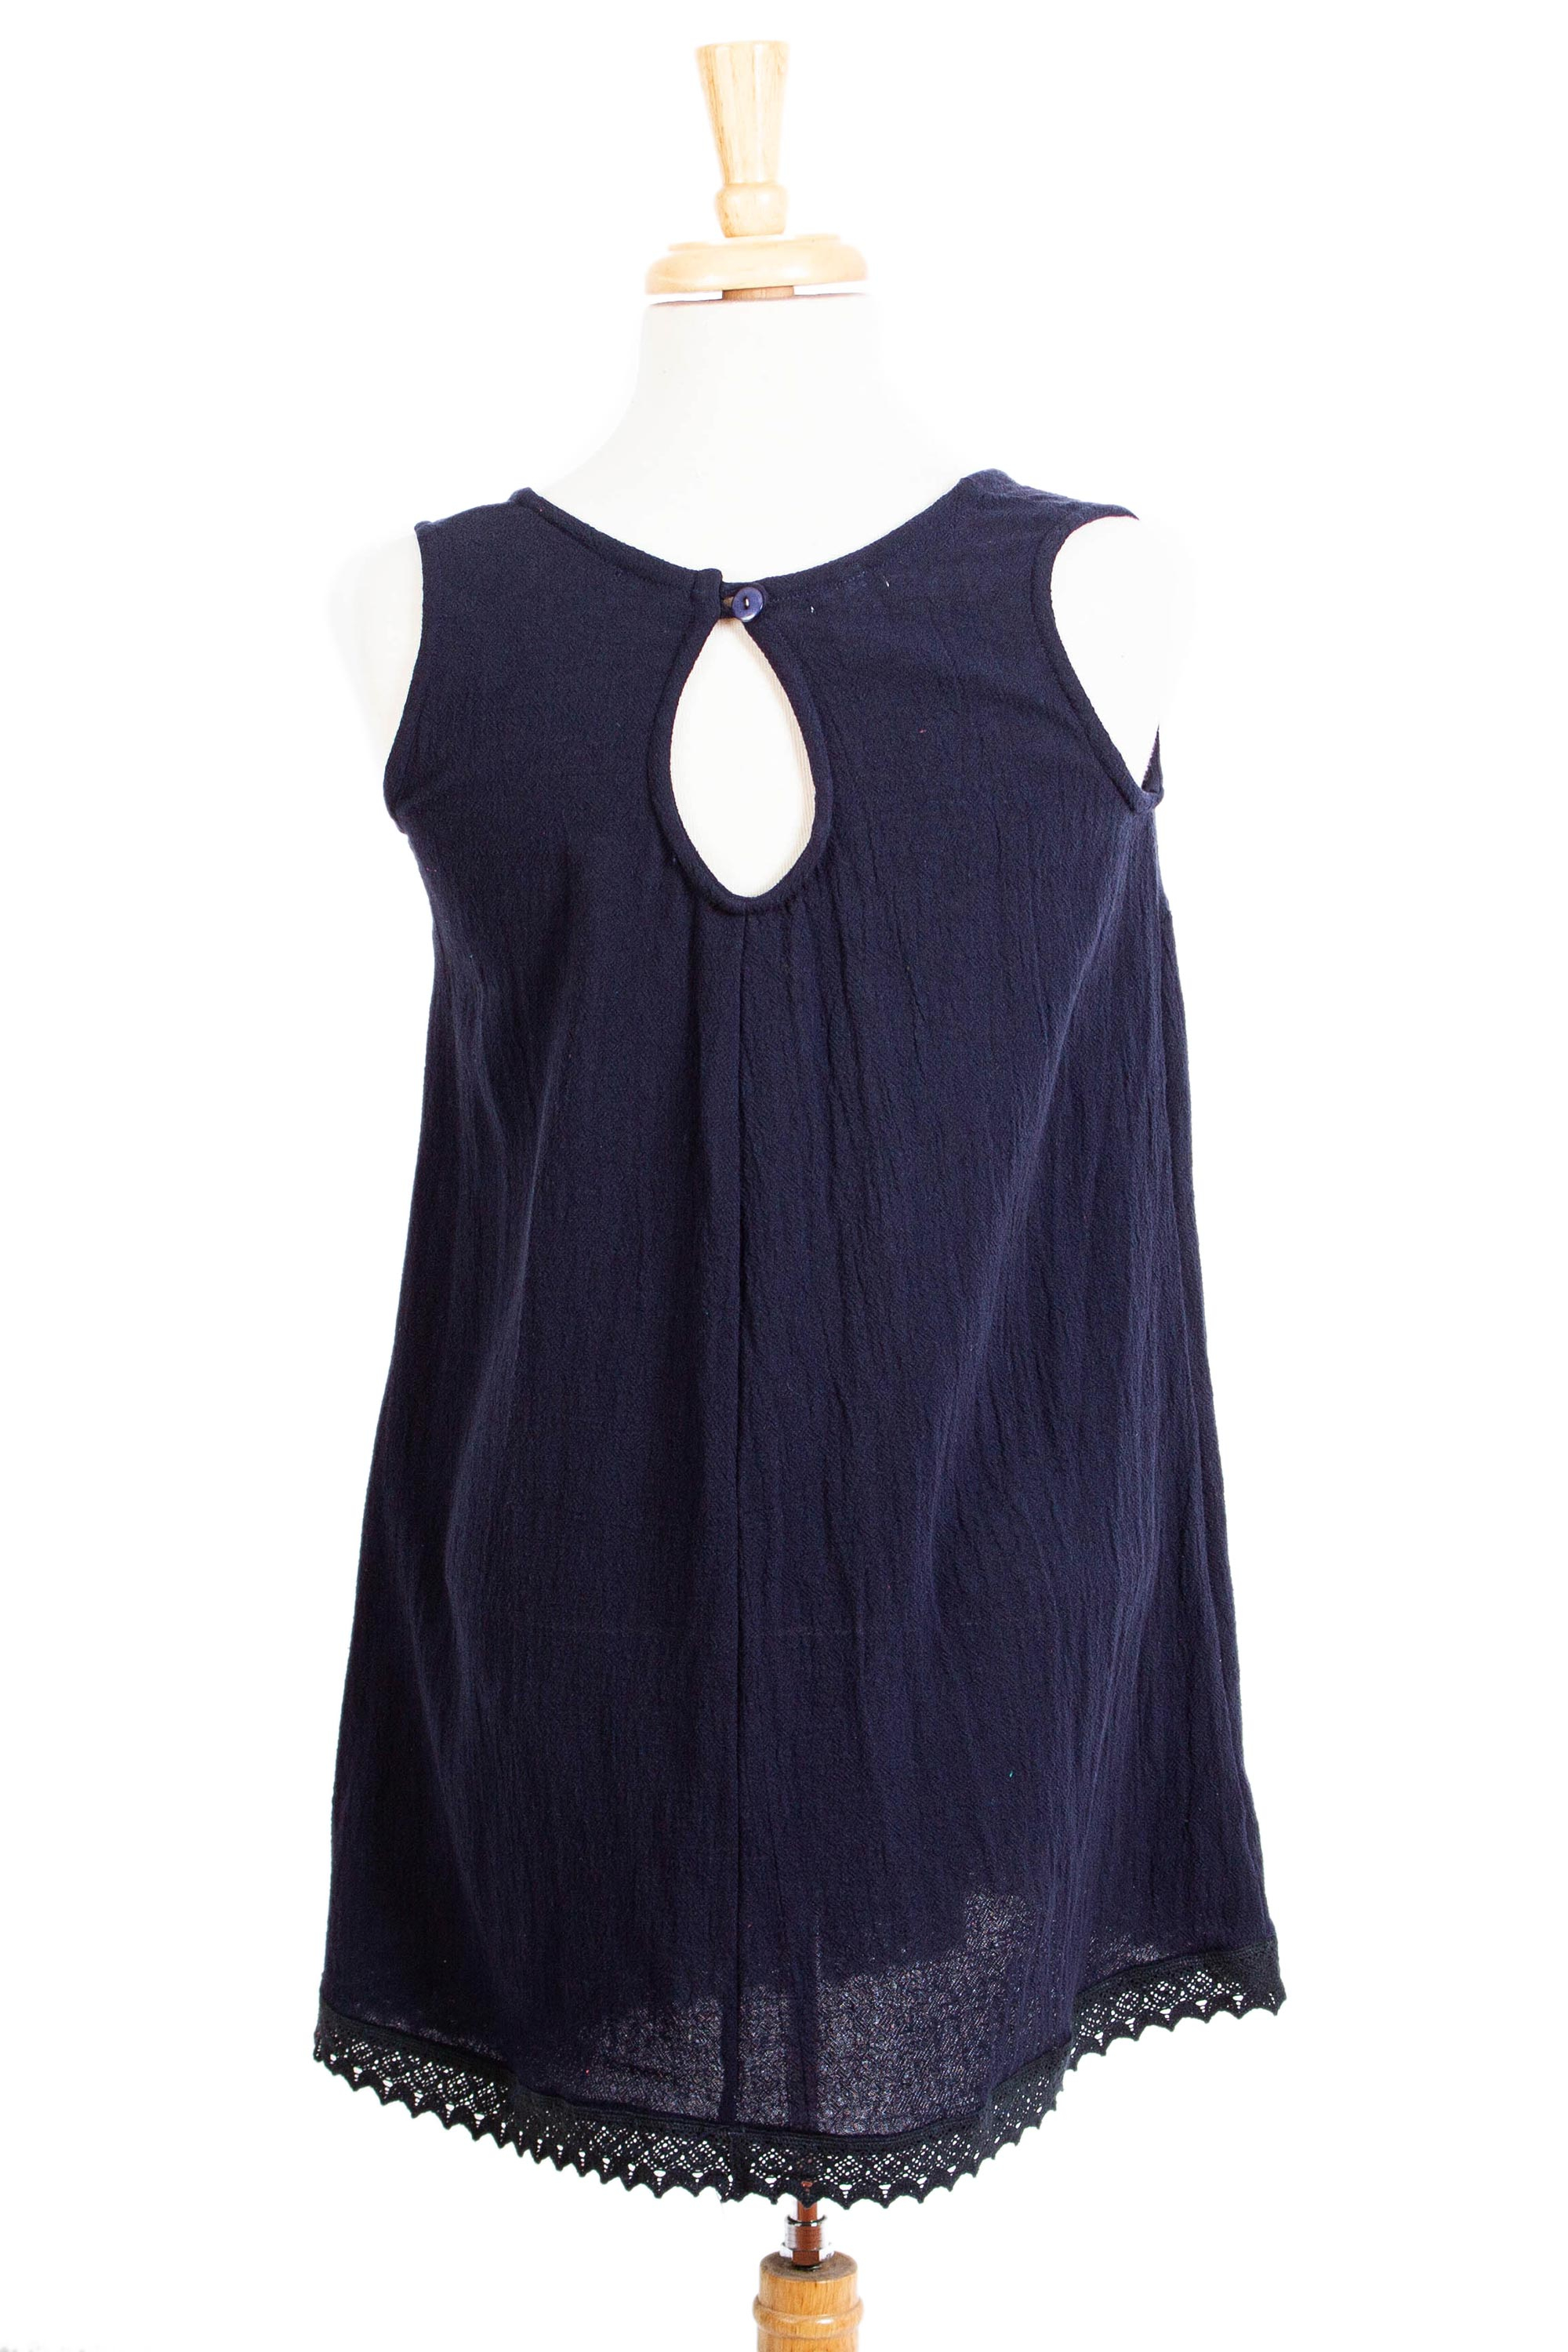 Cotton Gauze A-Line Tank in Solid Navy from Mexico - Simple Breeze in ...